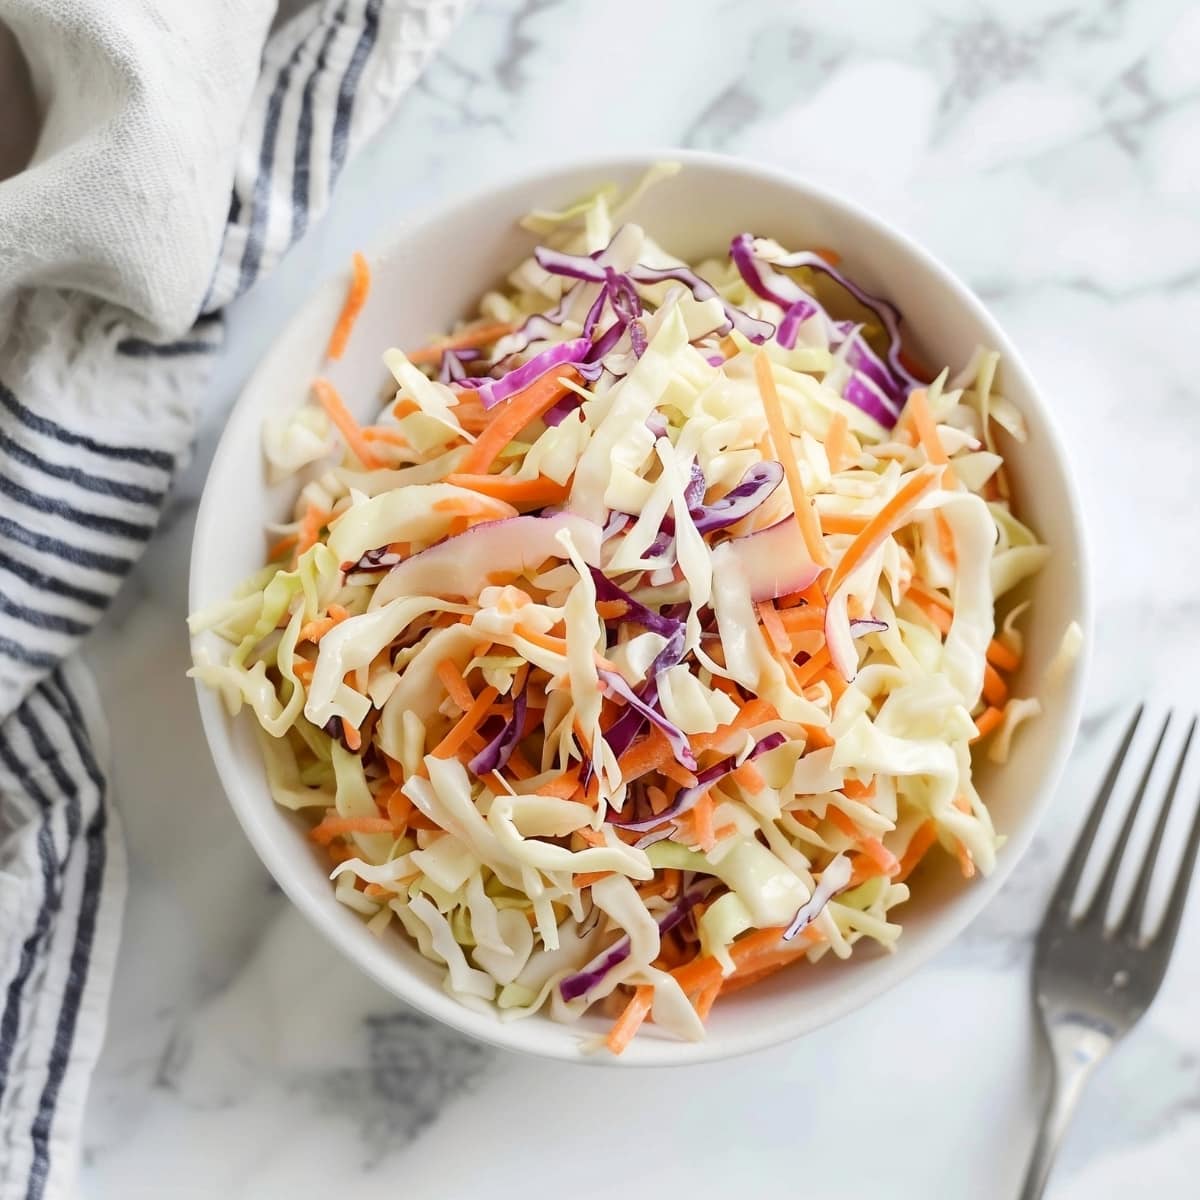 Coleslaw in a bowl on a white marble table